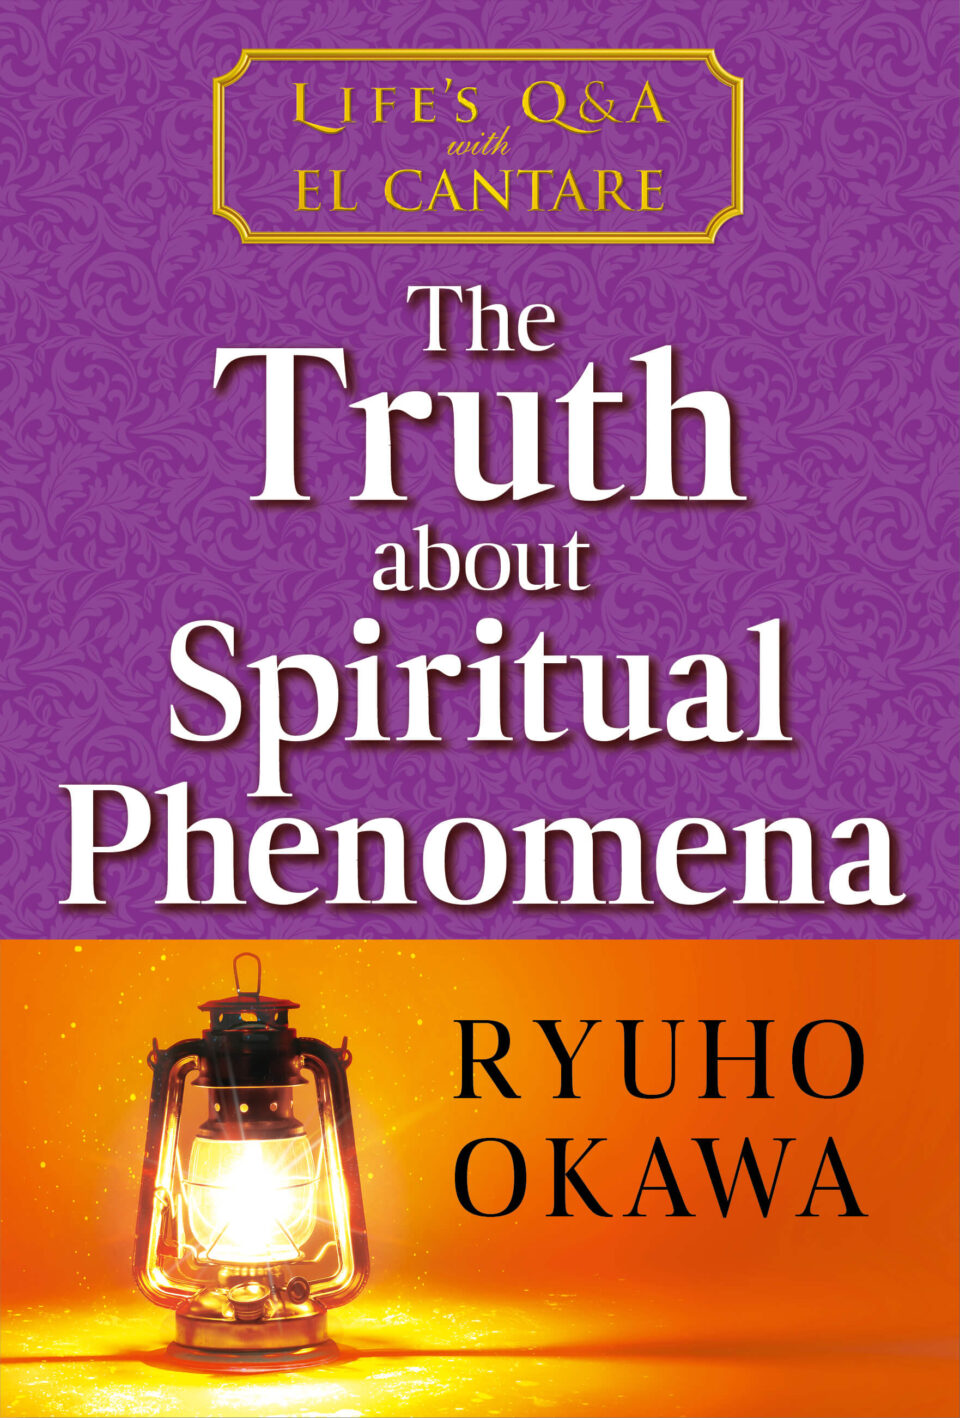 The Truth about Spiritual Phenomena: Life’s Q&A with El Cantare is out now!